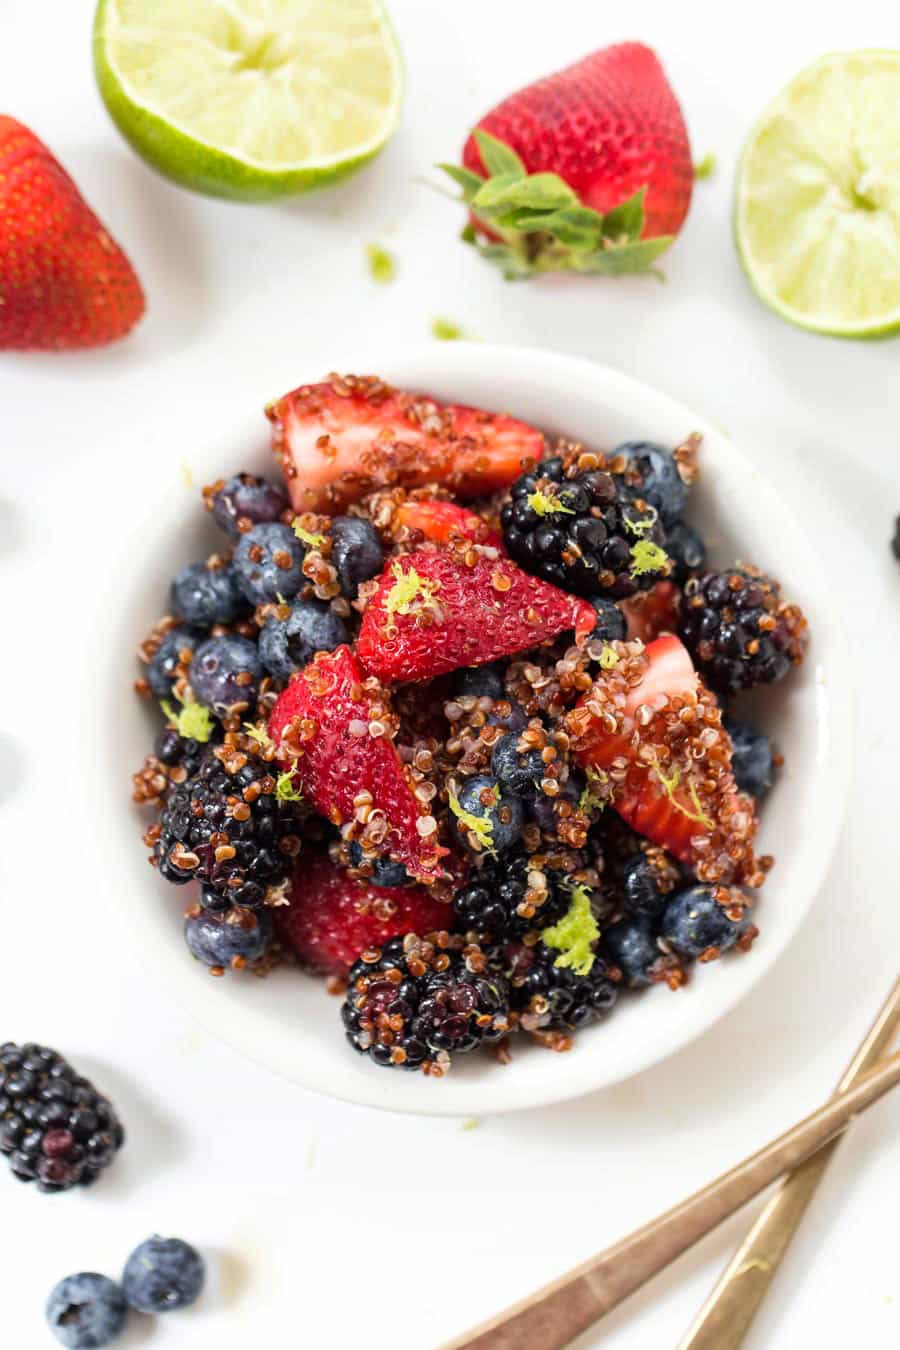 This AMAZING Triple Berry Quinoa Salad is made in under 10 minutes, with only 7 ingredients AND it's naturally GF & VEGAN!